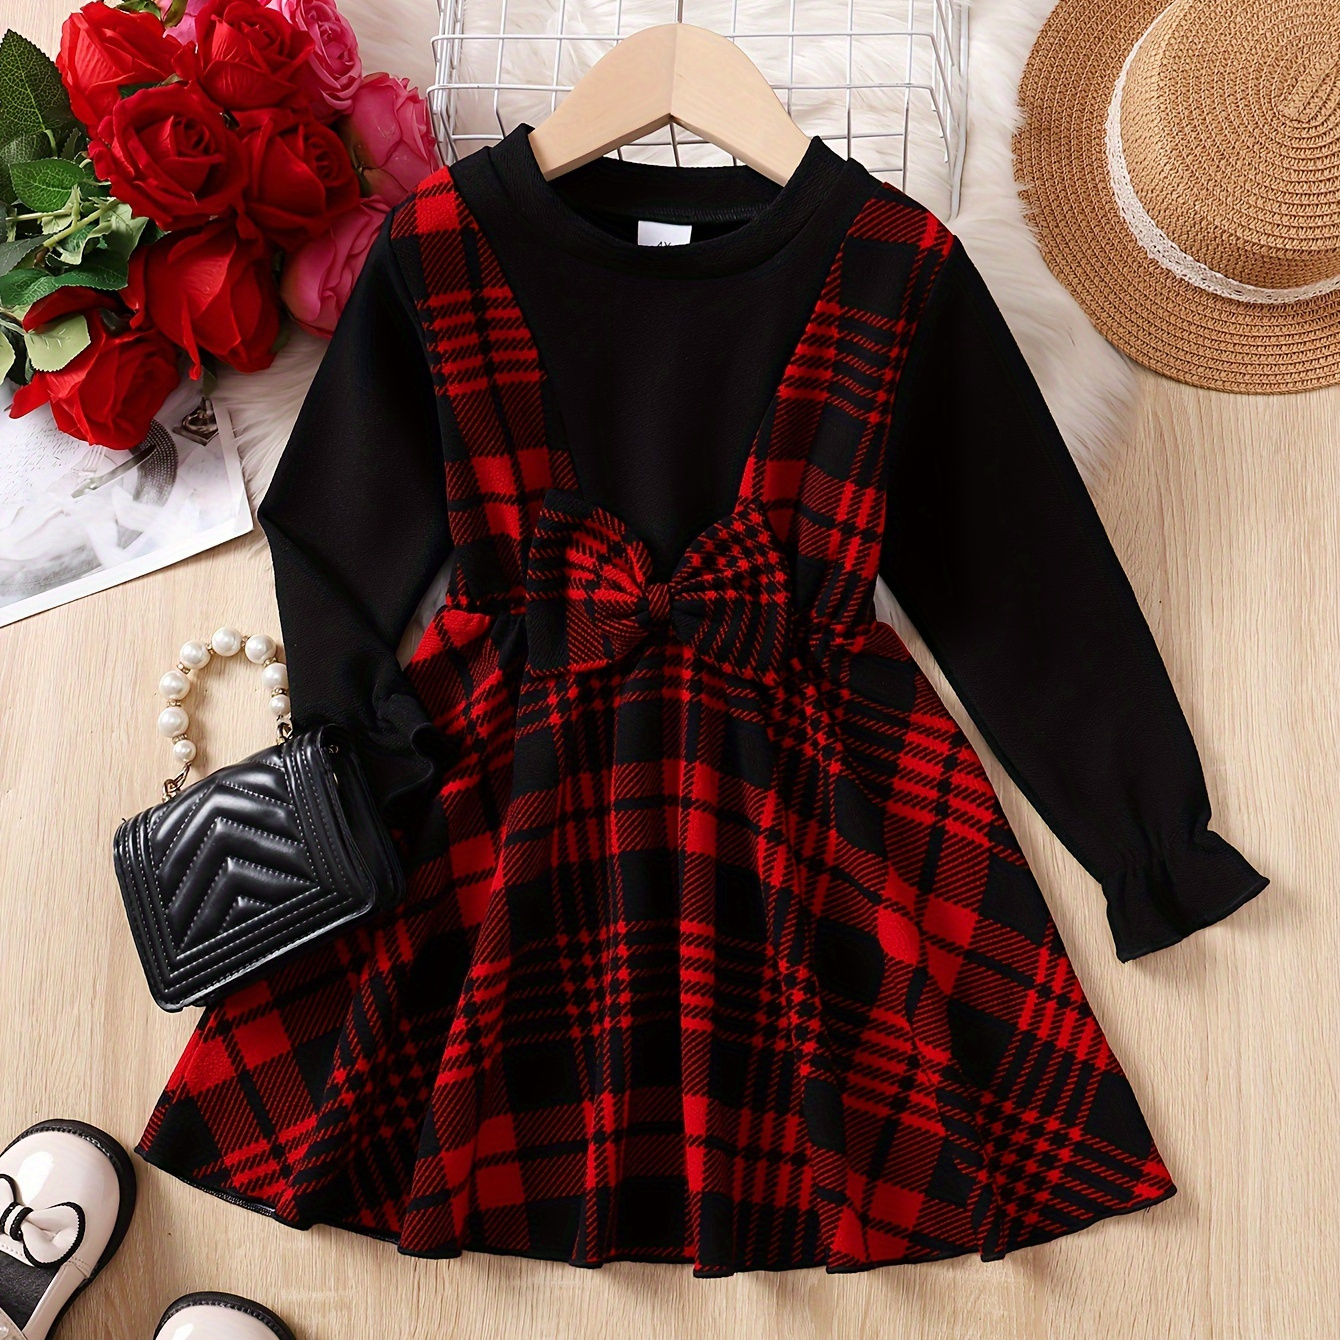 

Girls Vintage Style Splicing Plaid Dress Long Sleeve Dresses For Spring Fall Christmas Gift